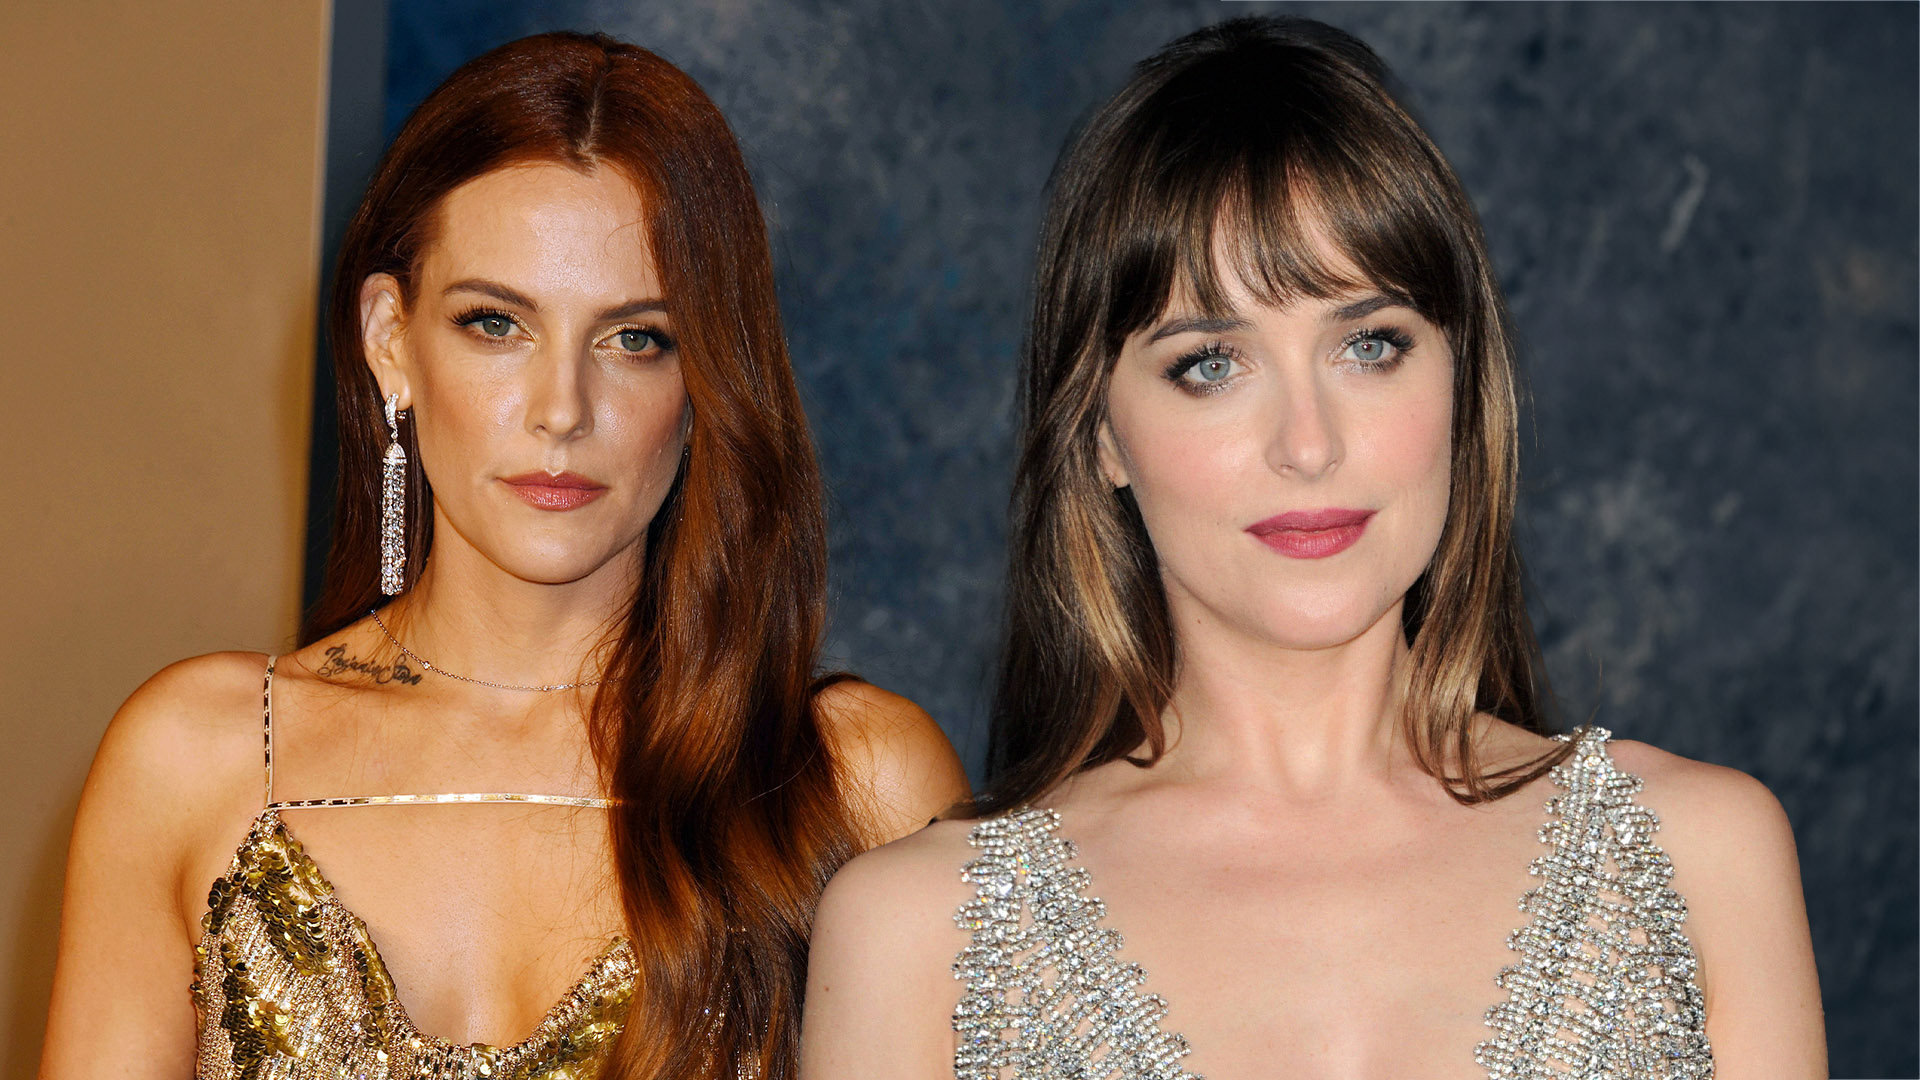 So, Dakota Johnson & Riley Keough Are BFFs Now? 2023 Continues to Surprise